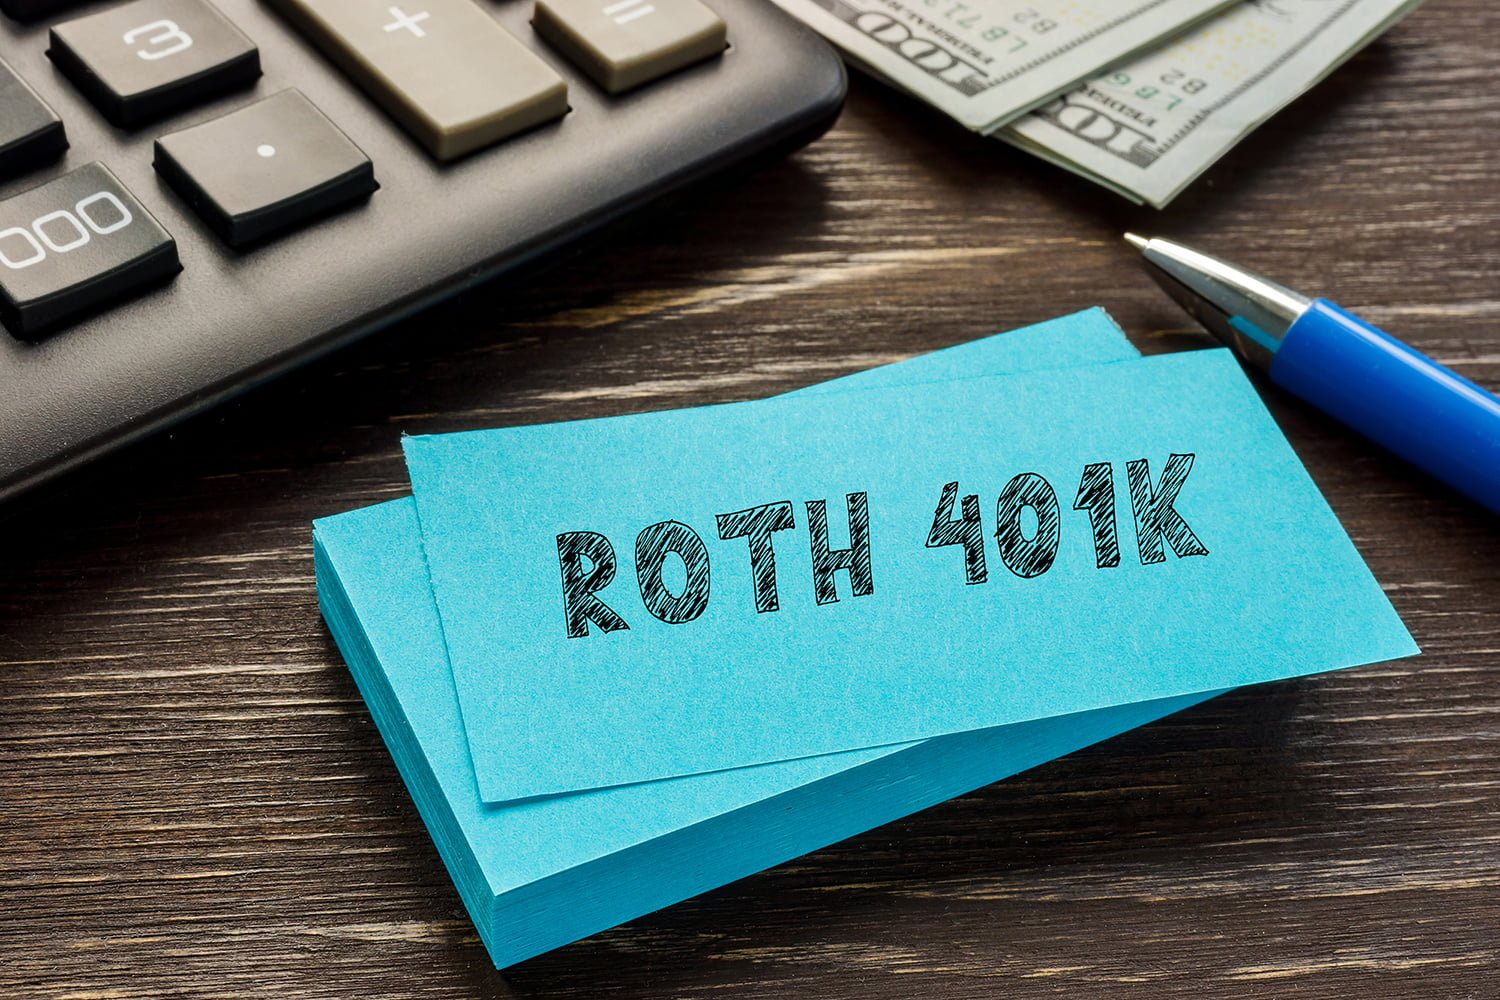 roth 401k writtein on a paper with a calculator in background